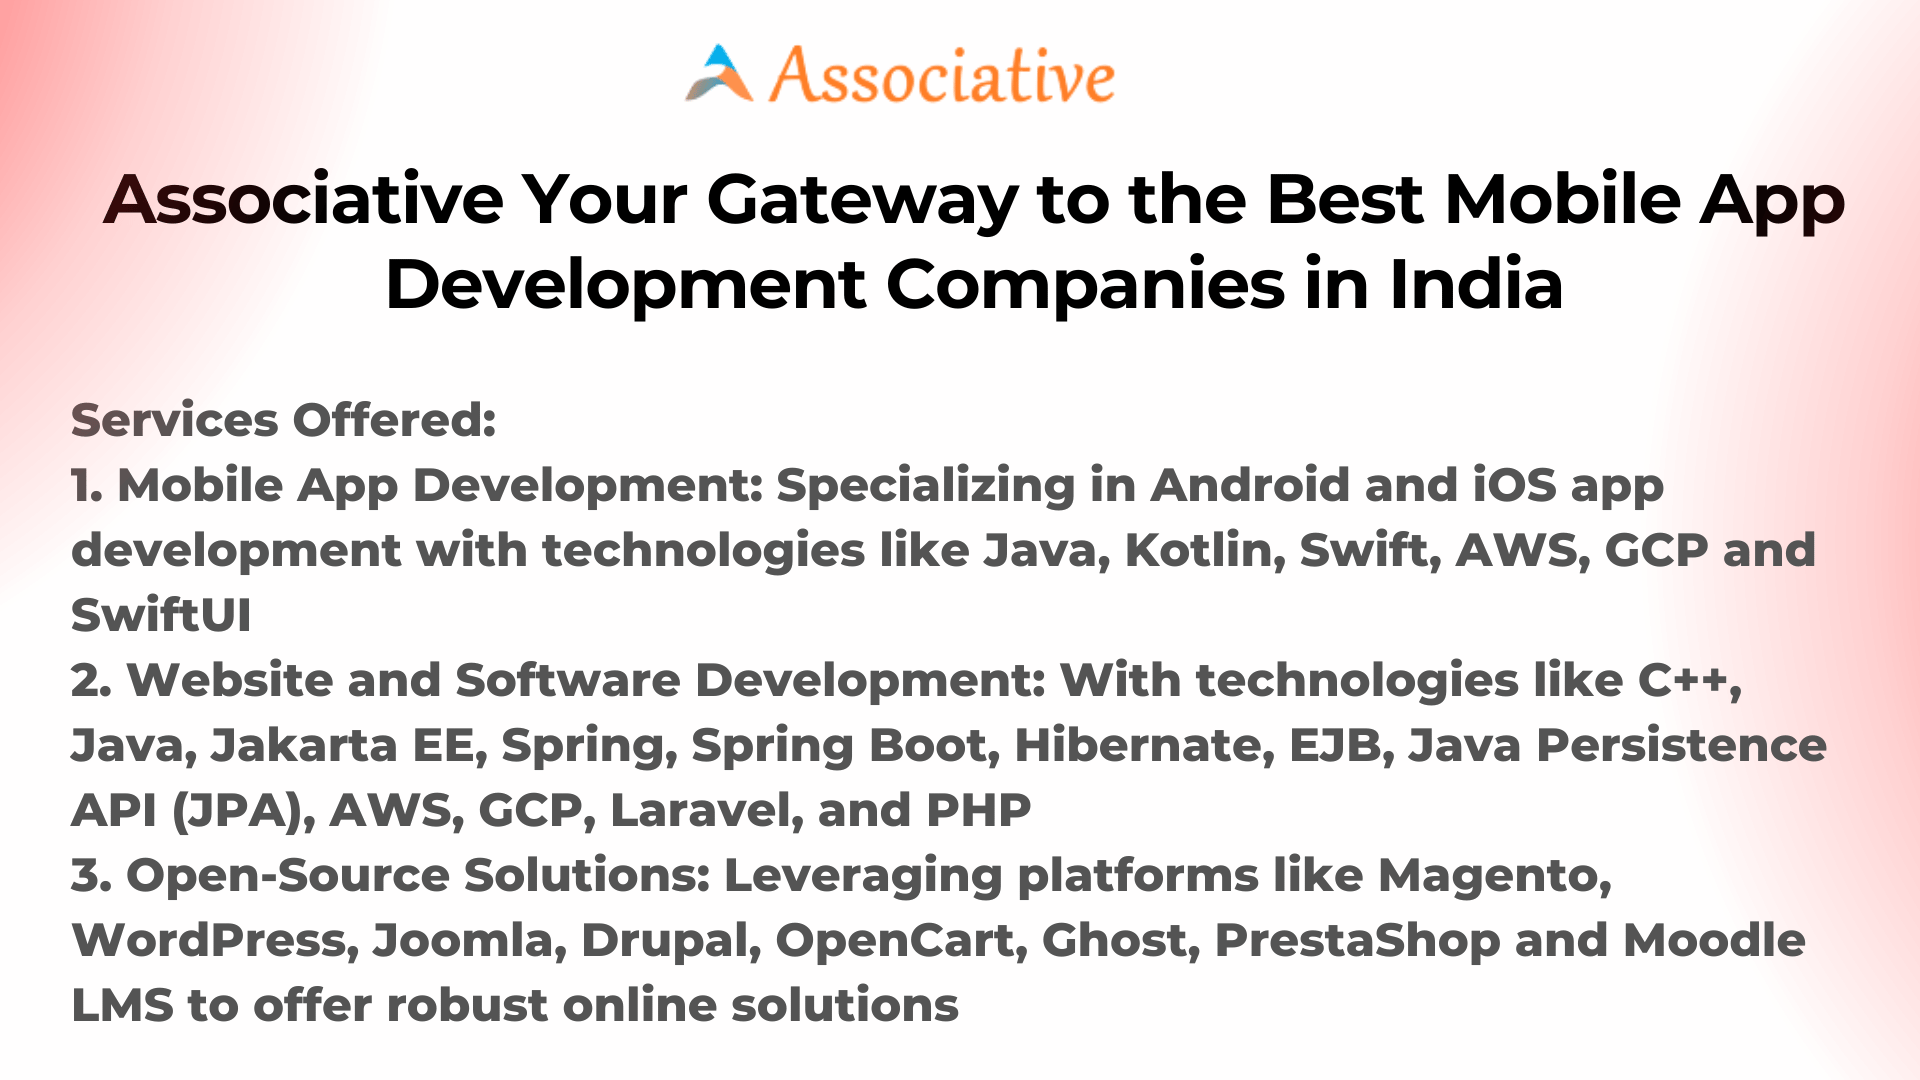 Associative Your Gateway to the Best Mobile App Development Companies in India